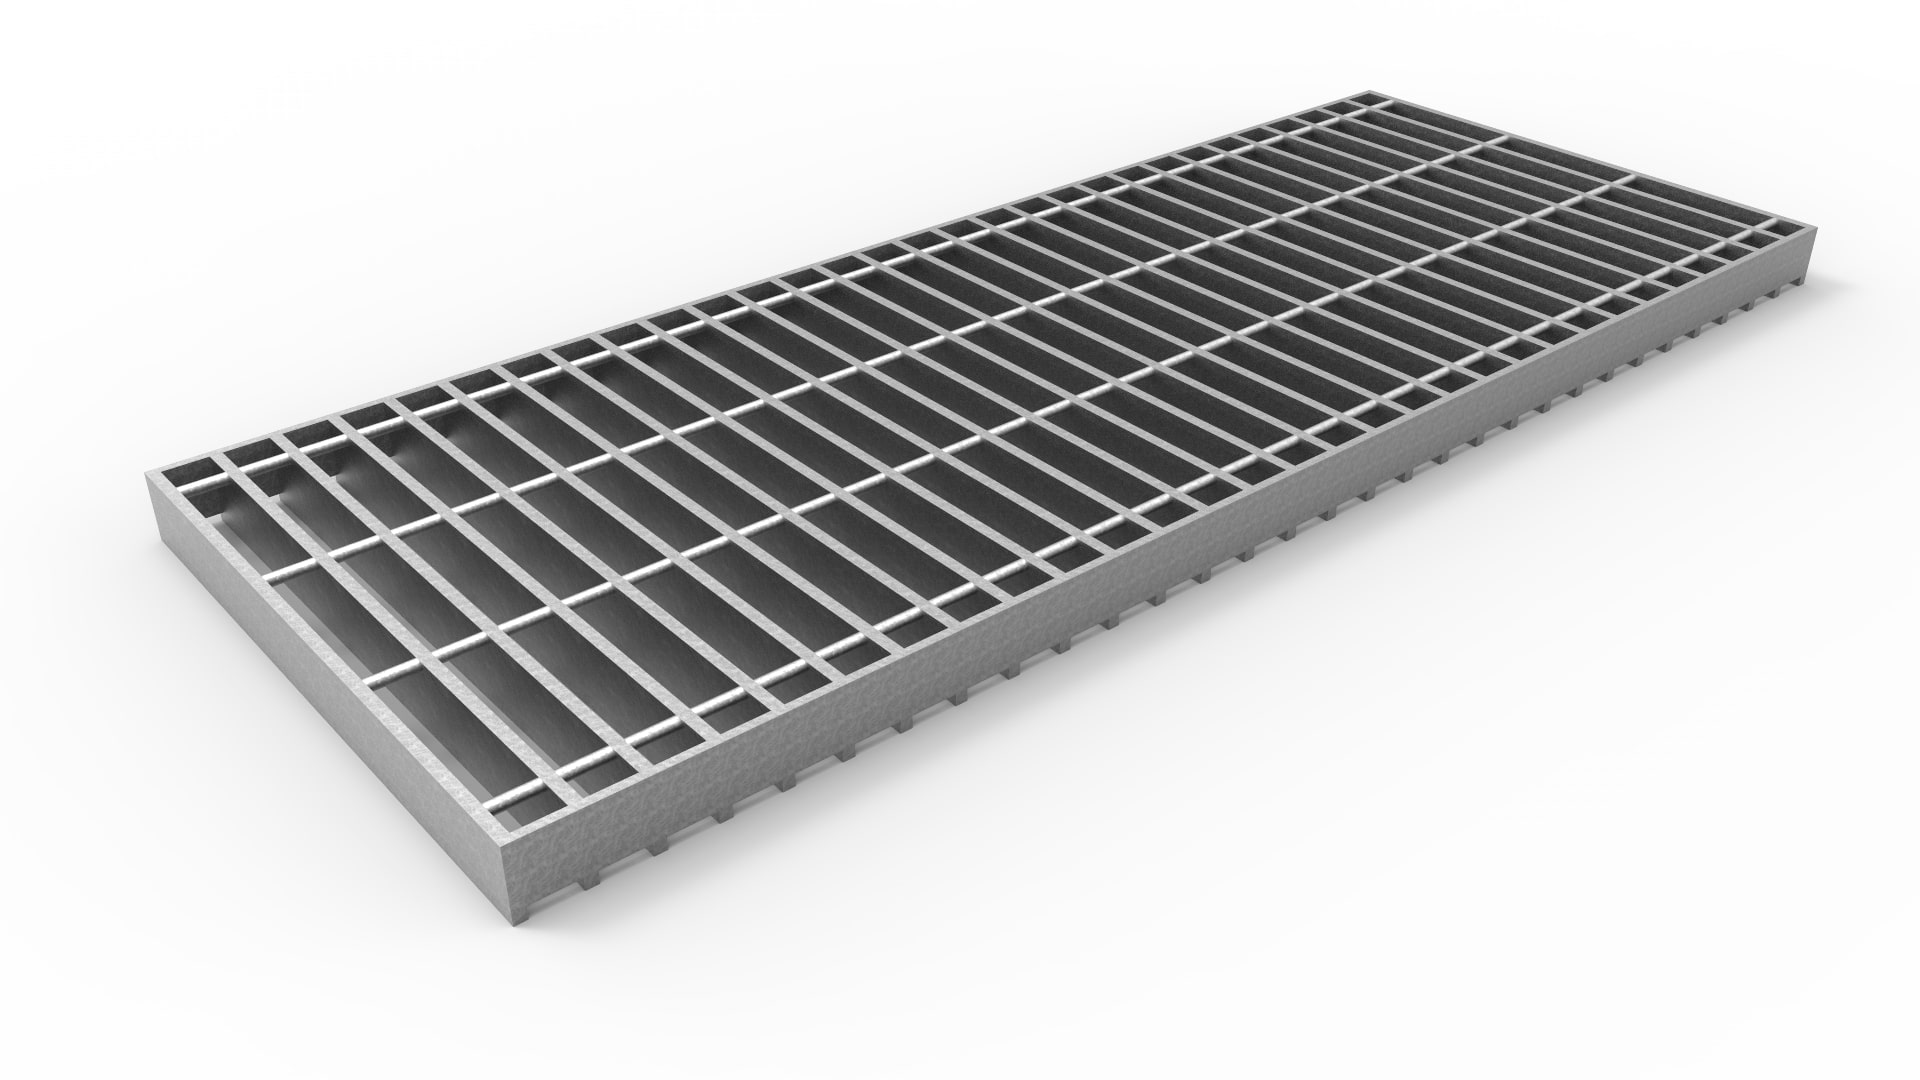 Source Drainage Trench & Driveway Channel Drain with Steel Grate FREE SHIPPING 